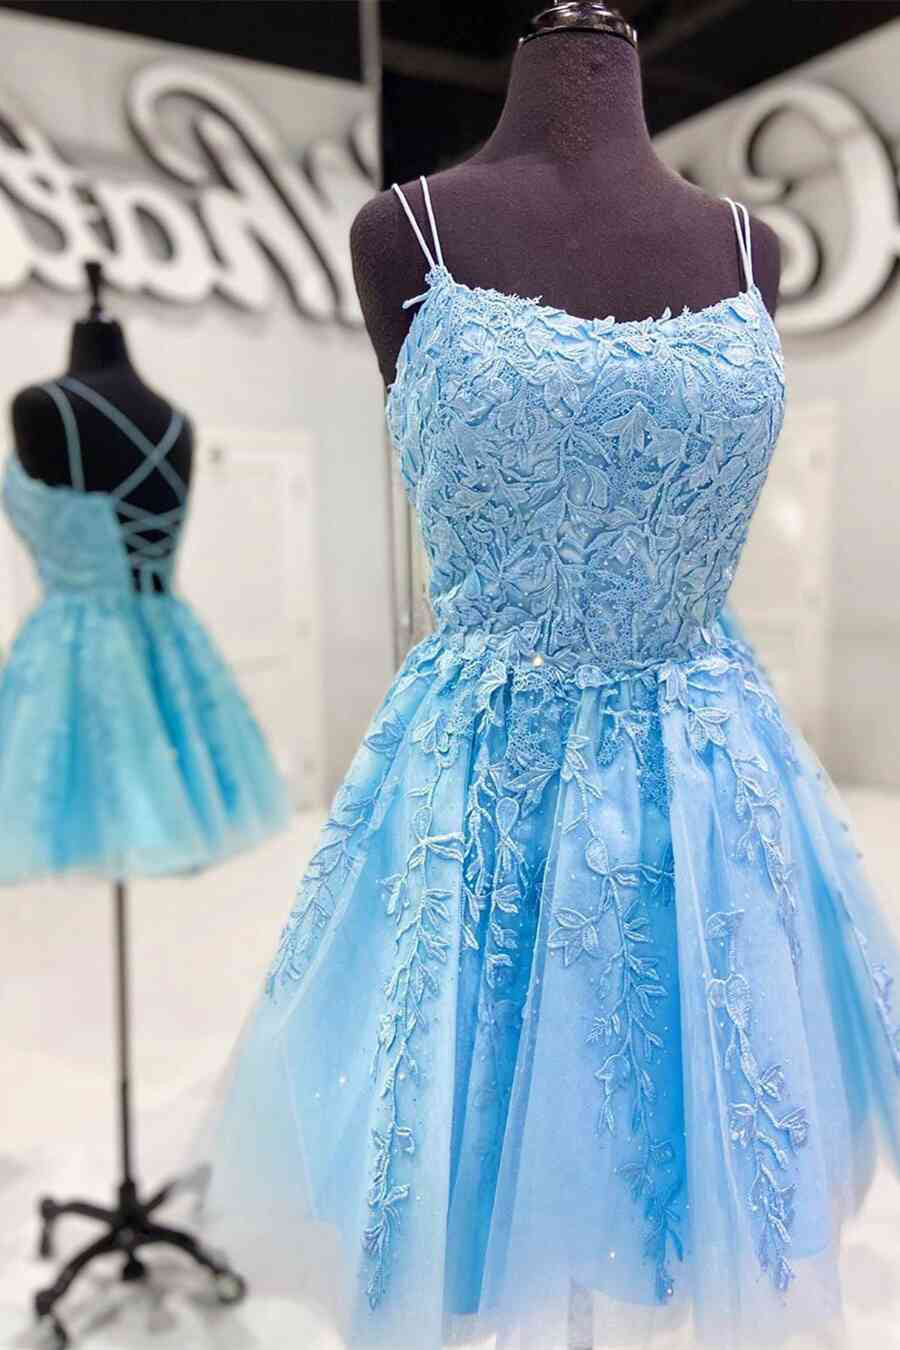 Bridesmaid Dress Gown, Blue A-line Spaghetti Straps Lace Short Prom Dresses, Homecoming Dresses